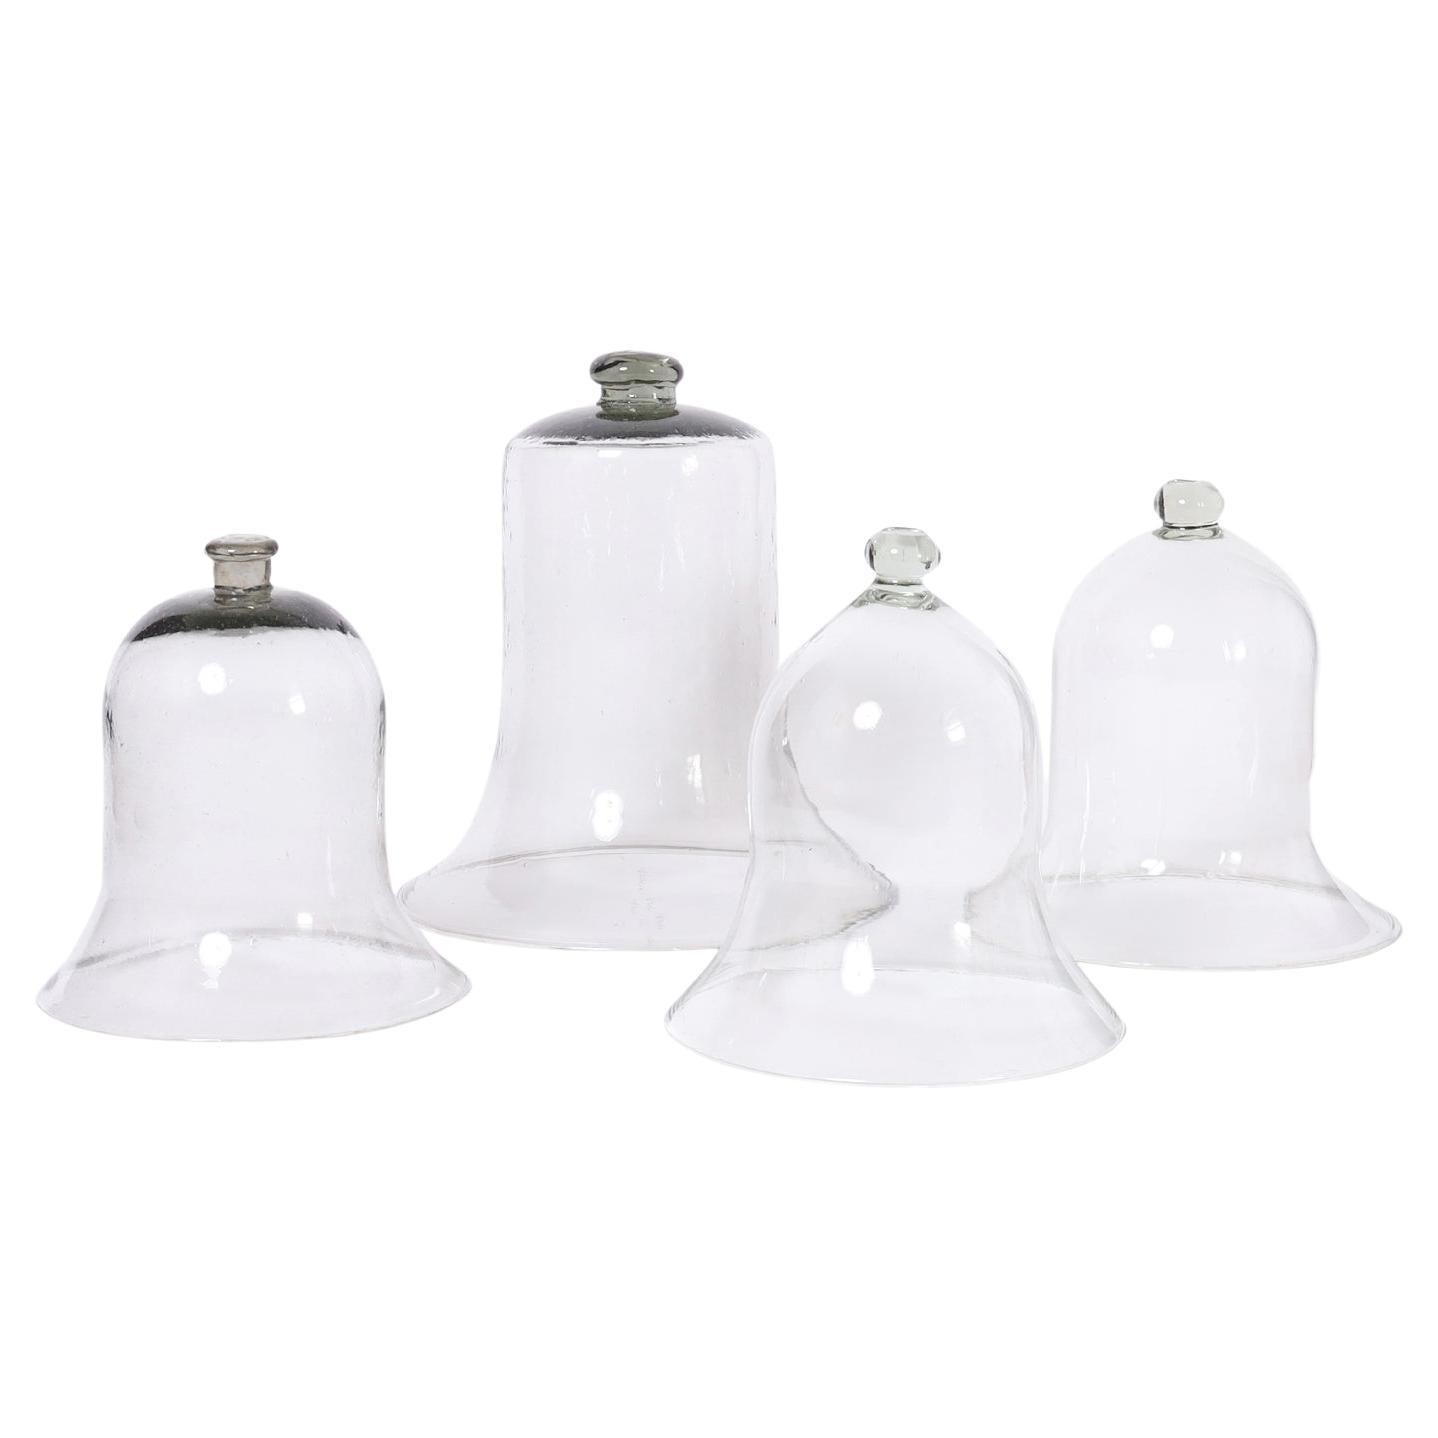 Set of Four Glass Garden Cloches Inbox, Priced Individually